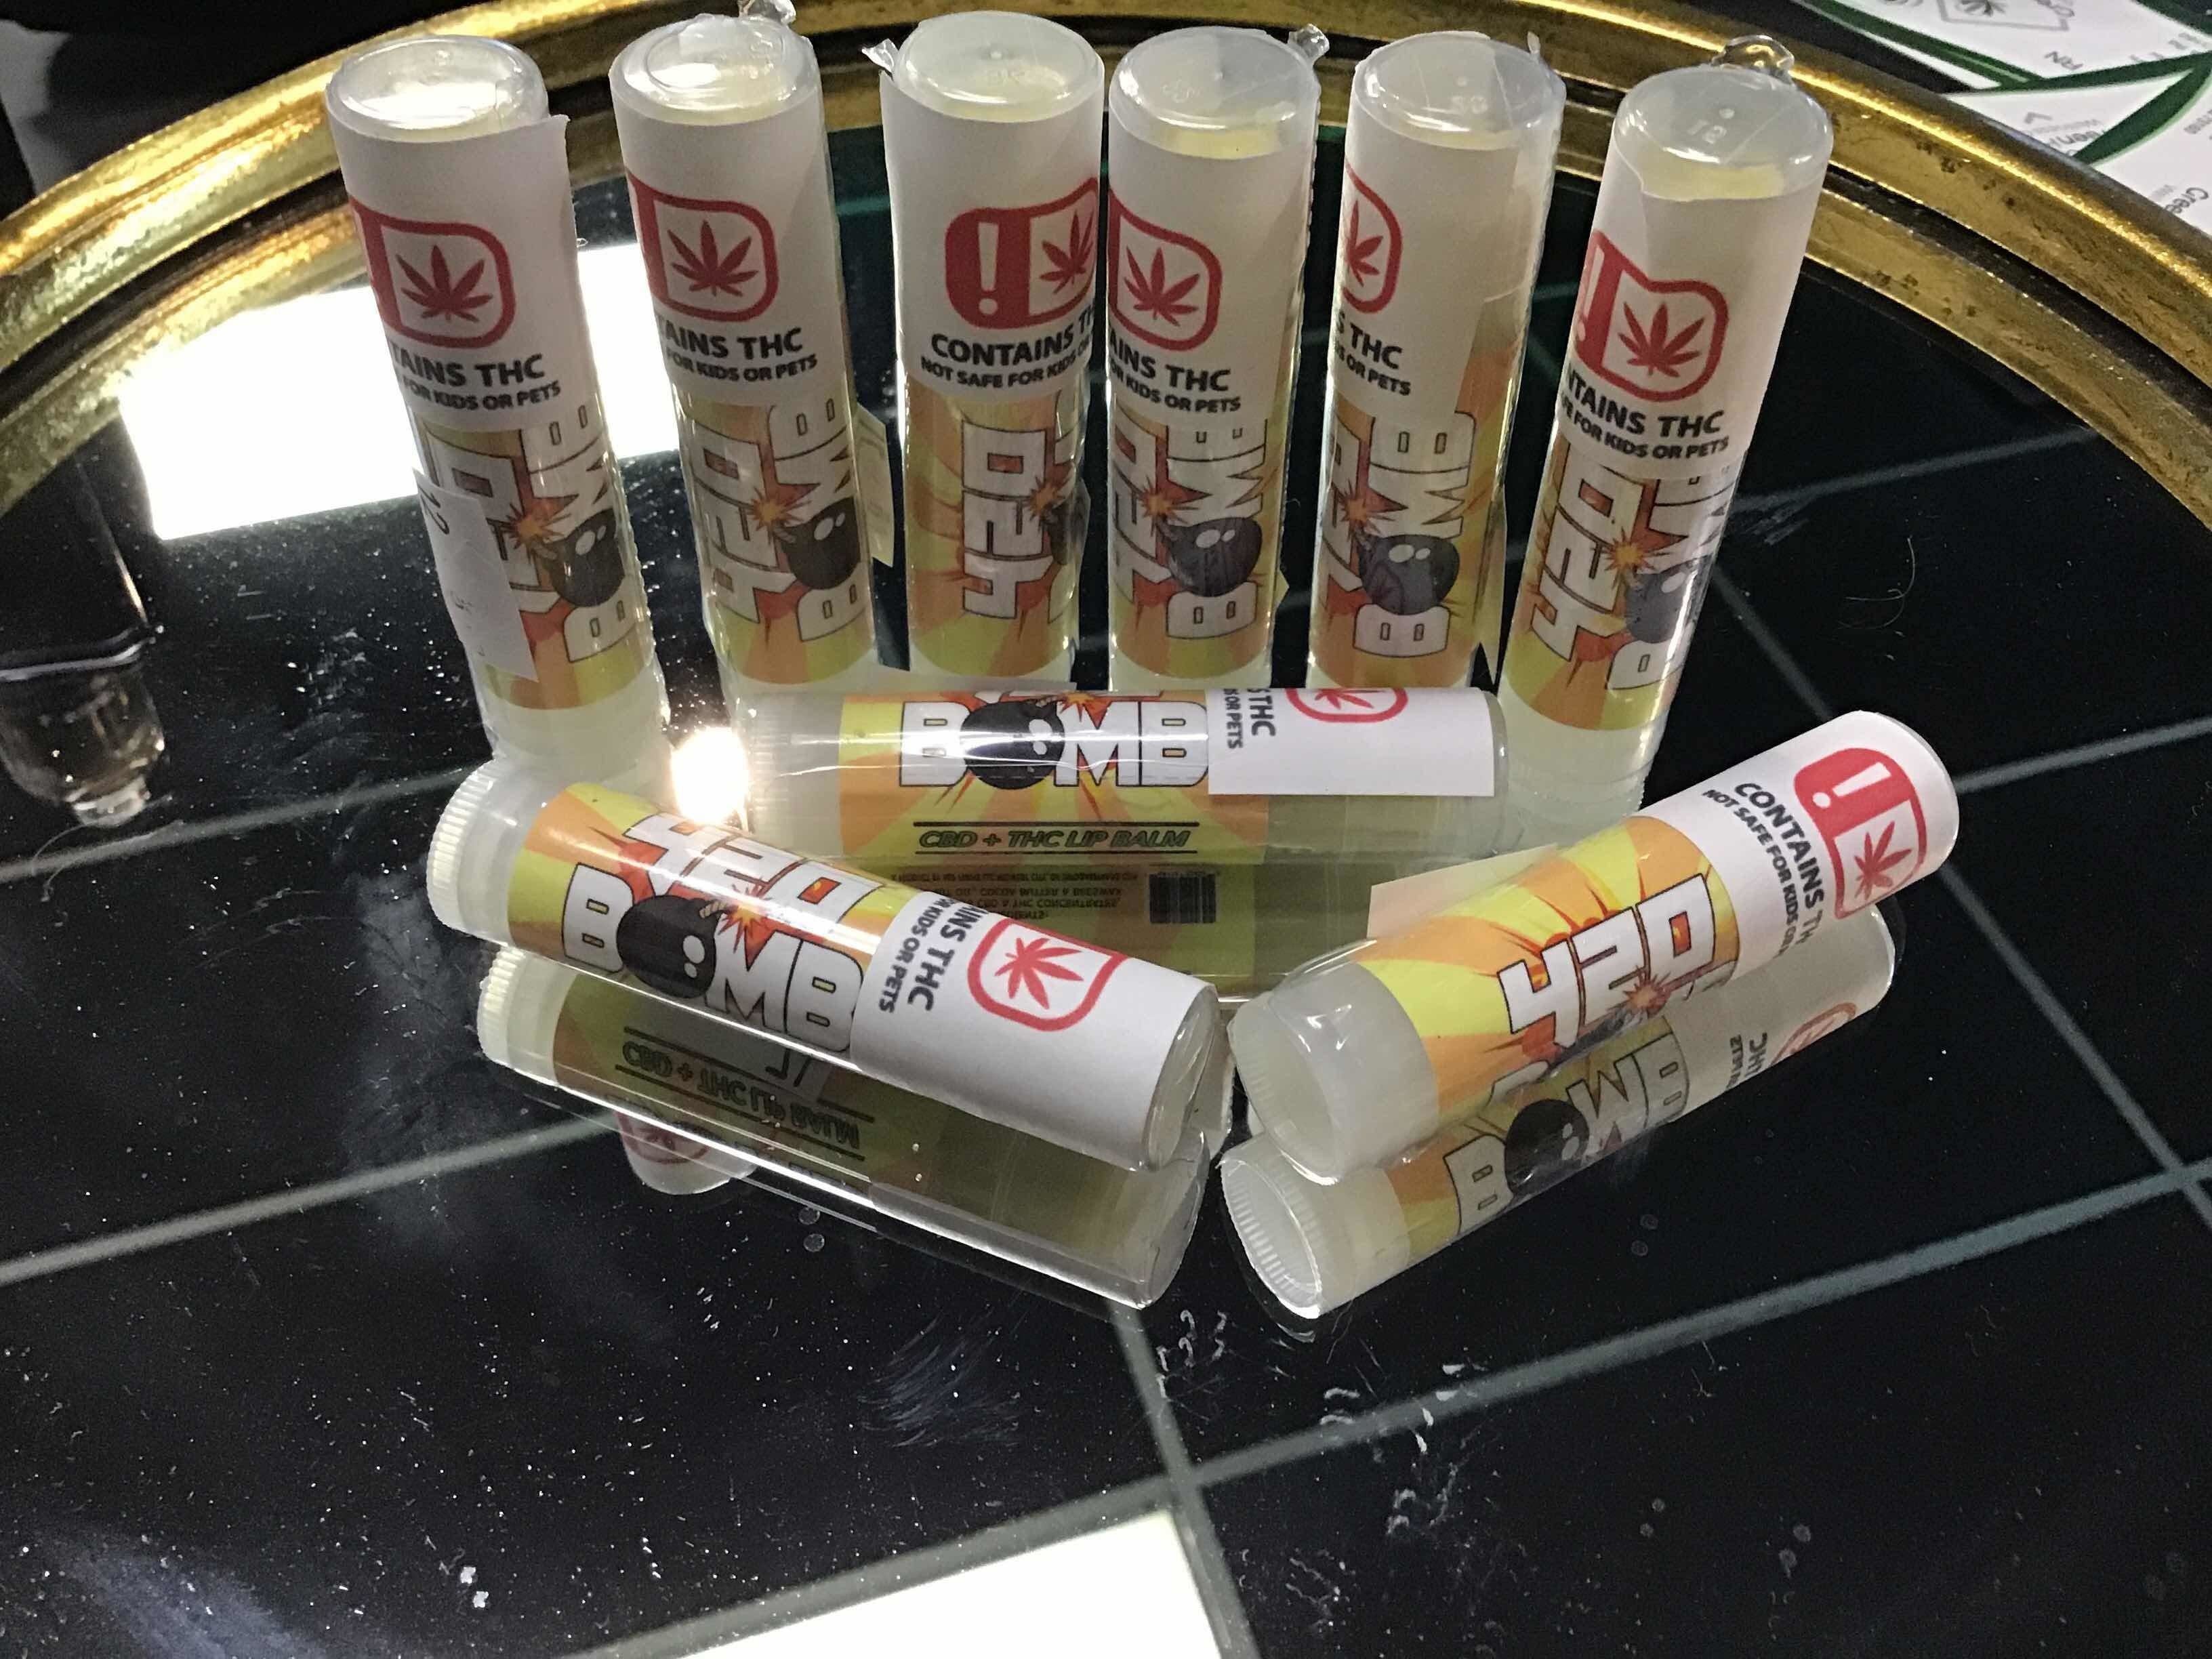 topicals-420-bomb-chapstick-12mg